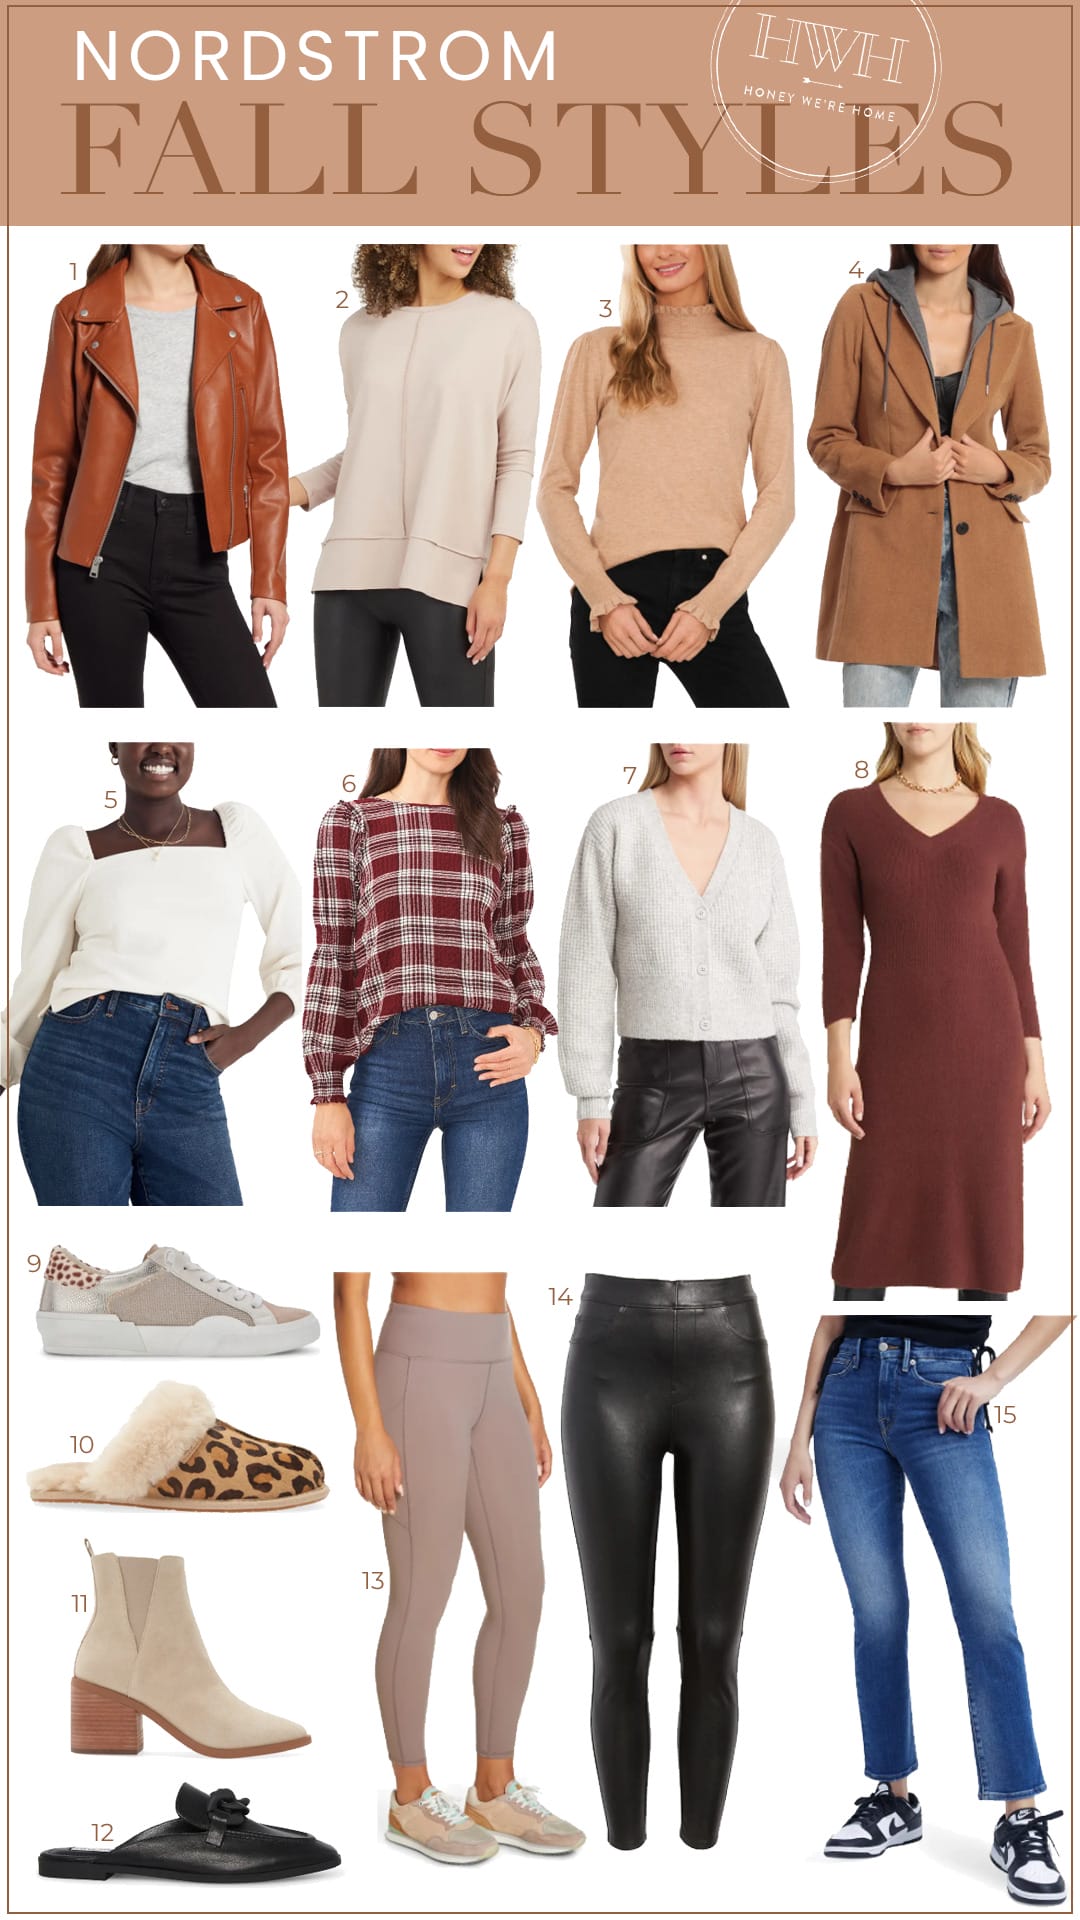 Nordstrom Fall Styles, Goodies, Sales & More